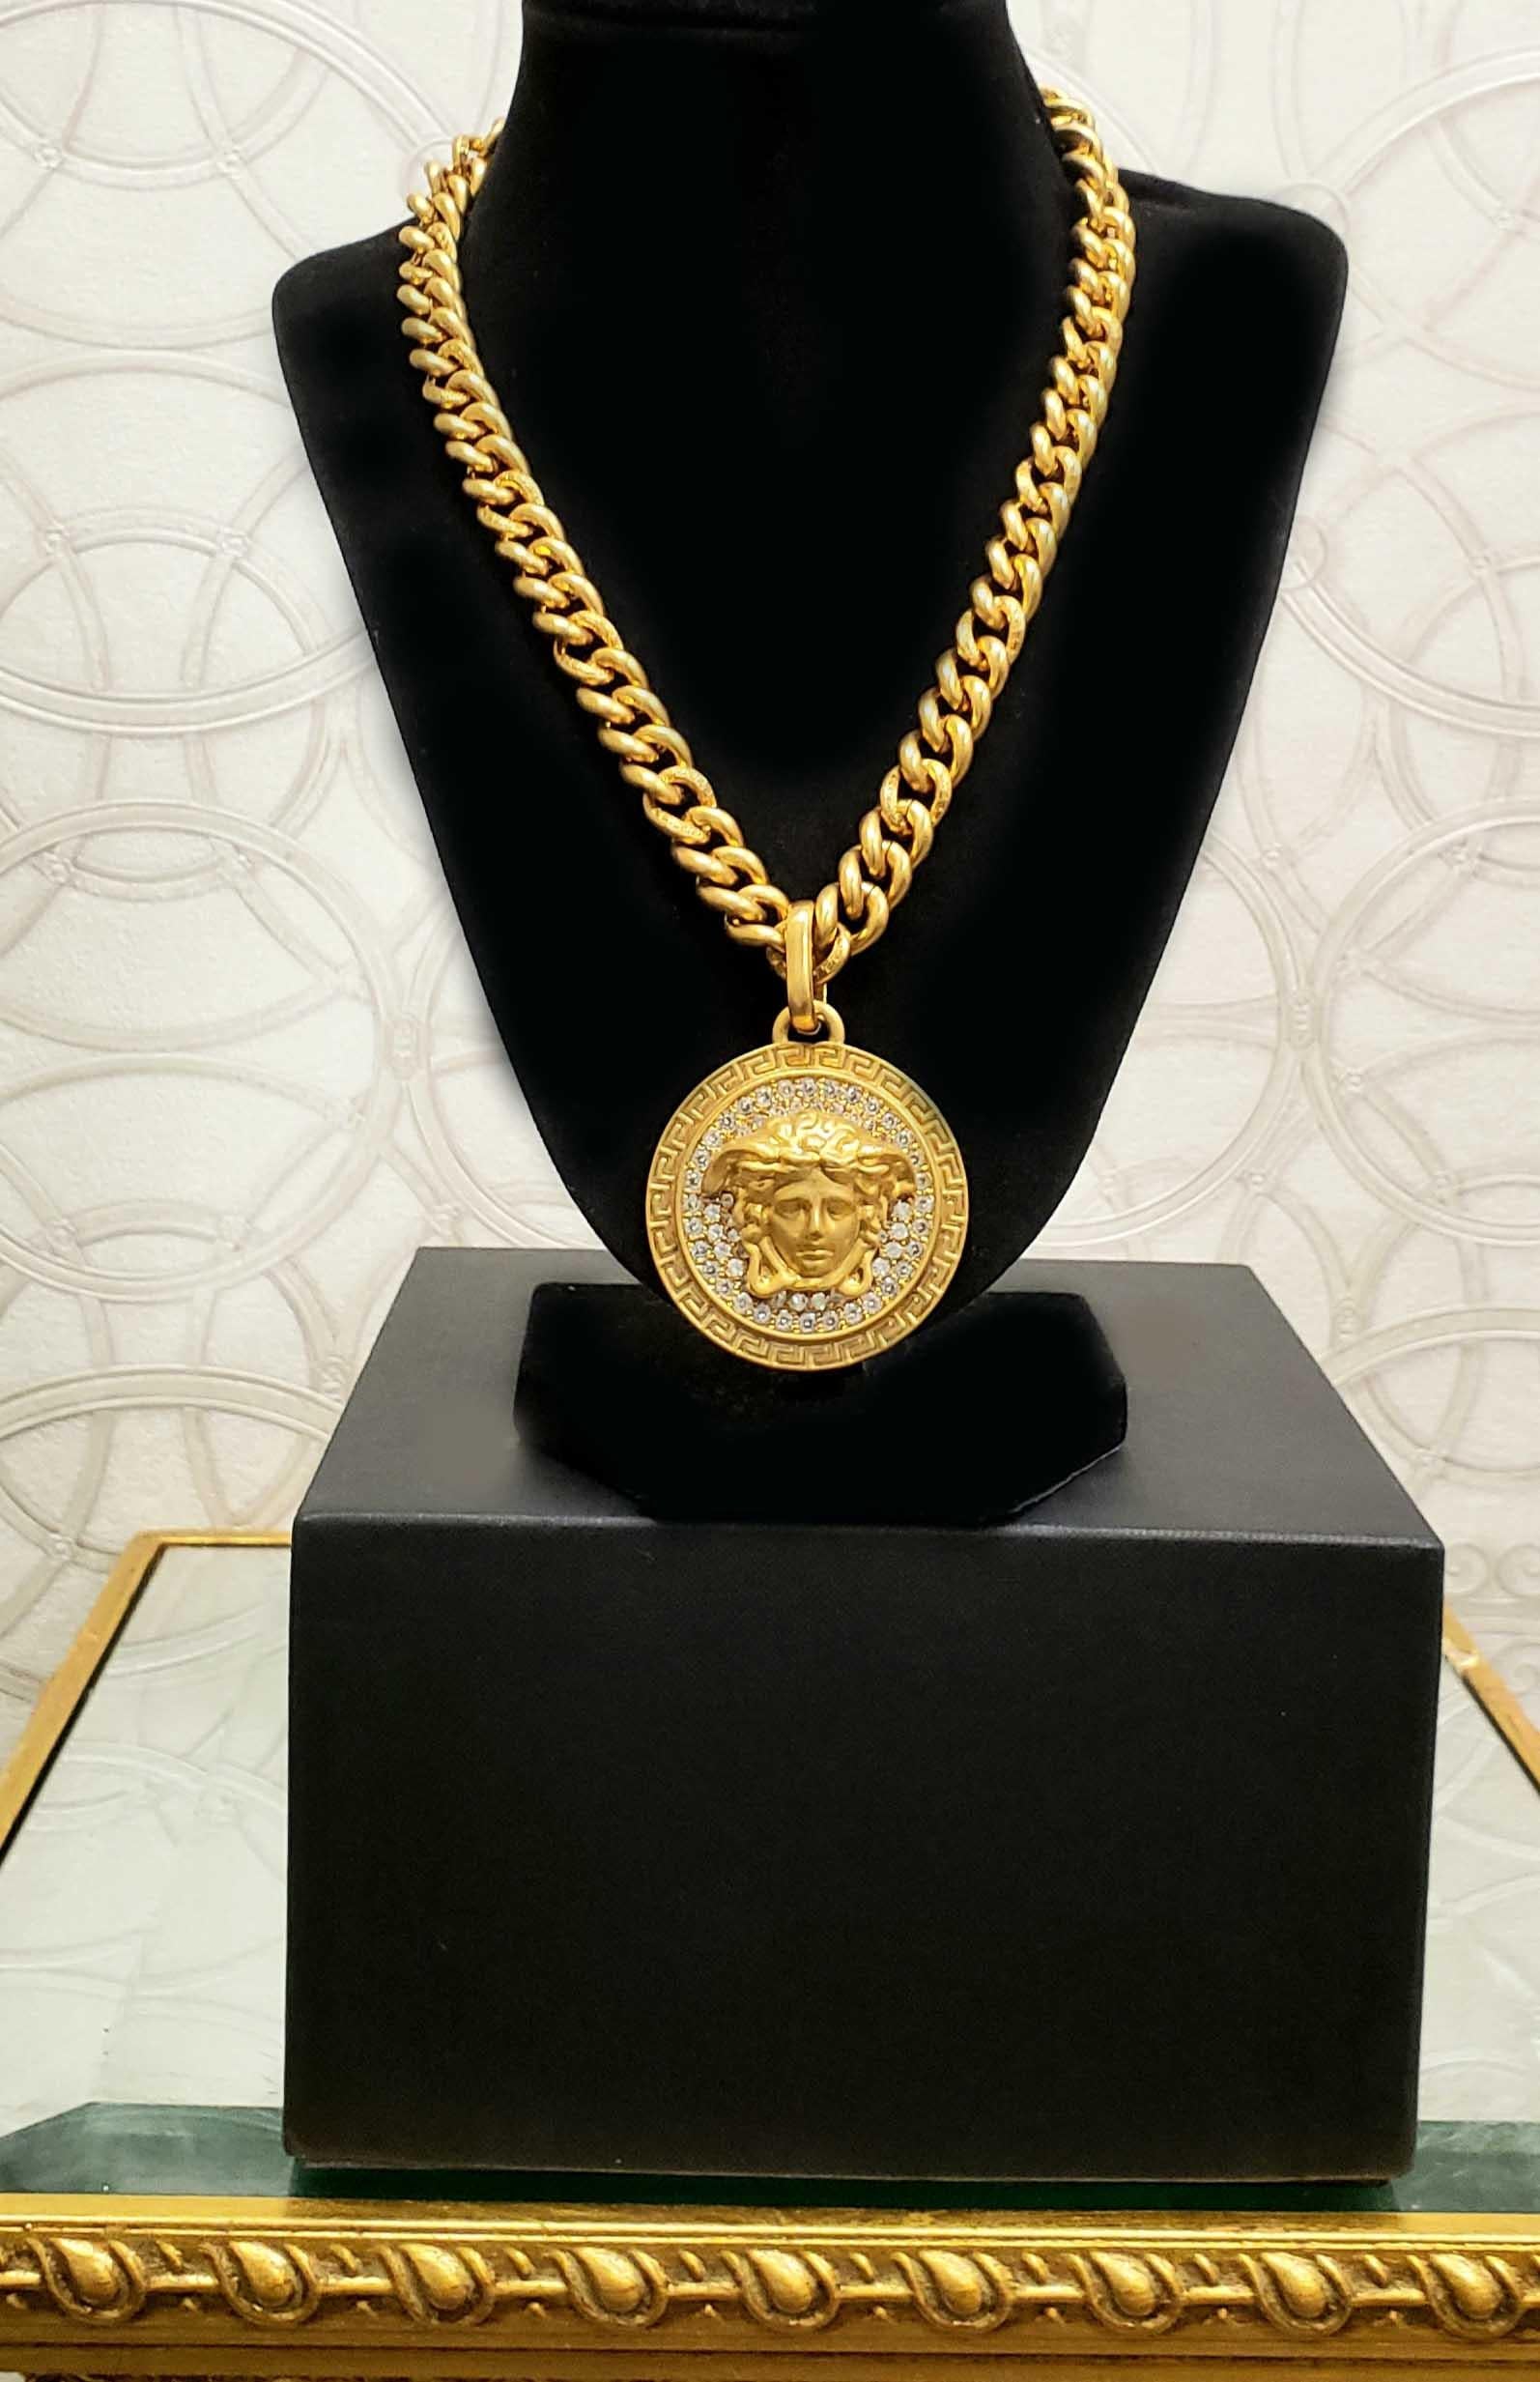  VERSACE

Brushed 24CT gold plated necklace.

Crystal embellished medallion with iconic Medusa. 

Logo engraved clasp fastening.

Made in Italy

Brand New, display model got minor scratches.

Comes with Versace box and authenticity card.